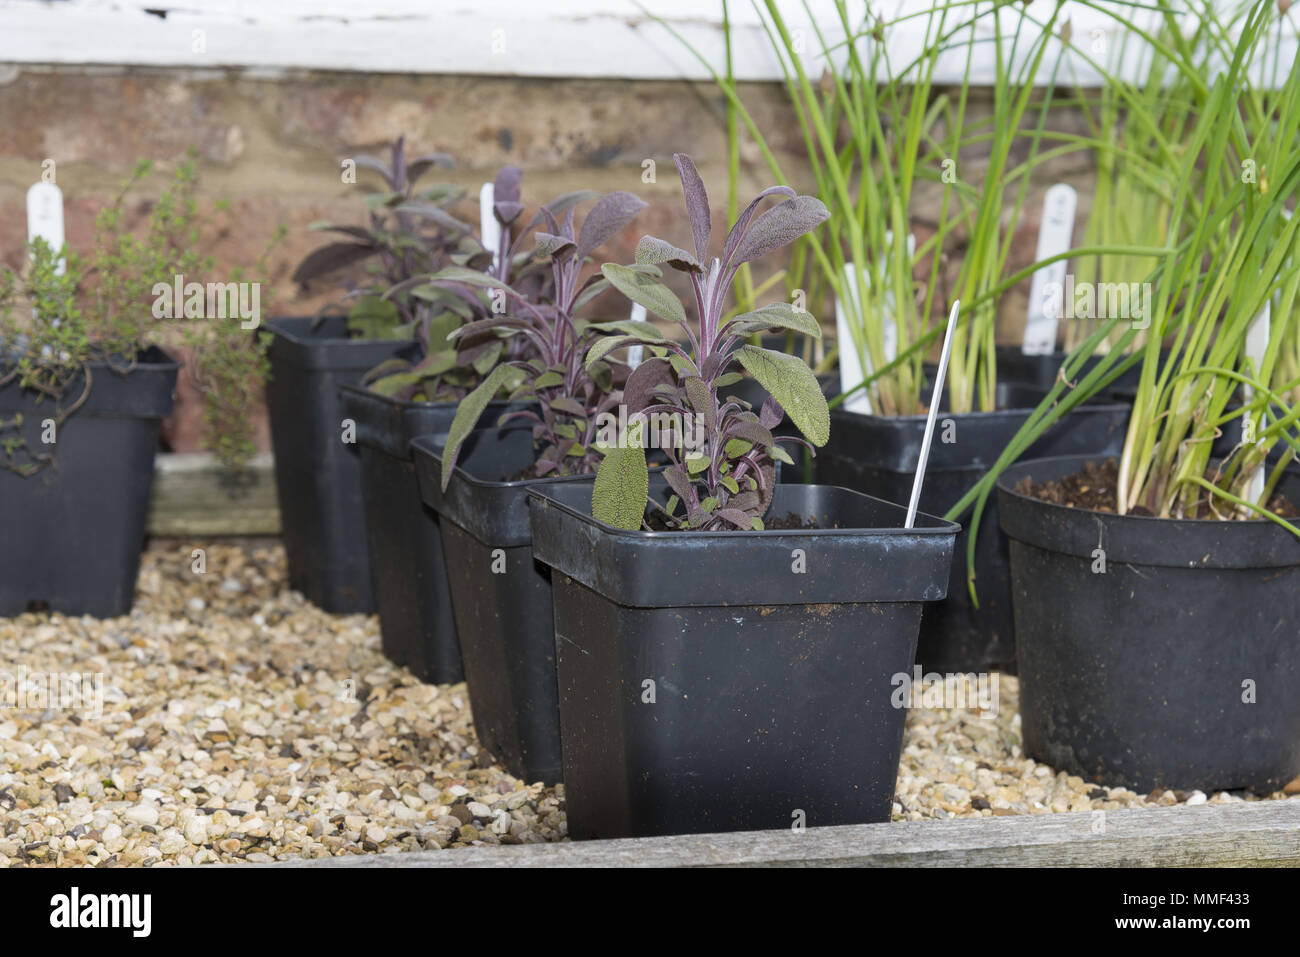 Purple sage plants in black plastic pots ready for planting in the garden. Stock Photo